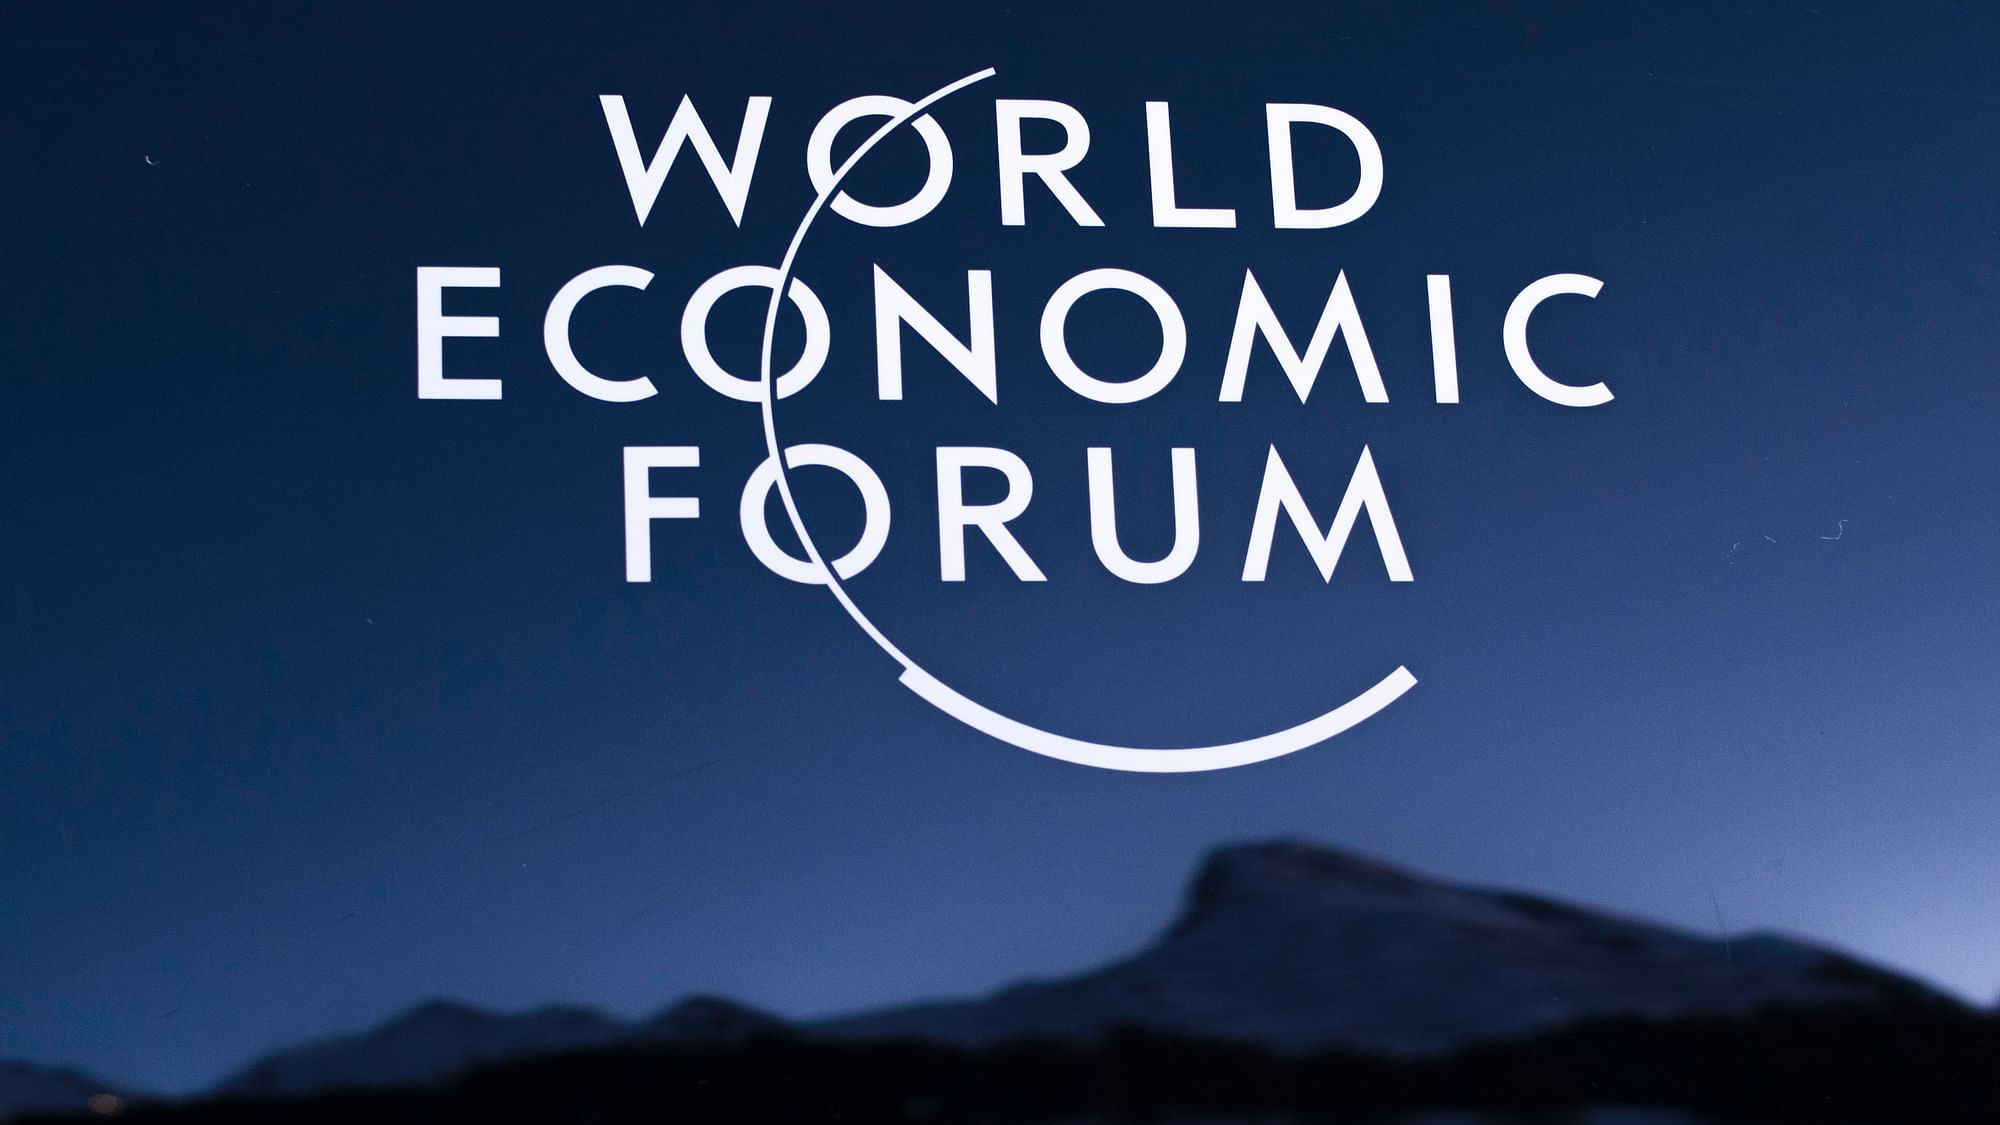 The survey was released on Monday, 21 January, on the eve of the World Economic Forum opening in Davos, Switzerland.